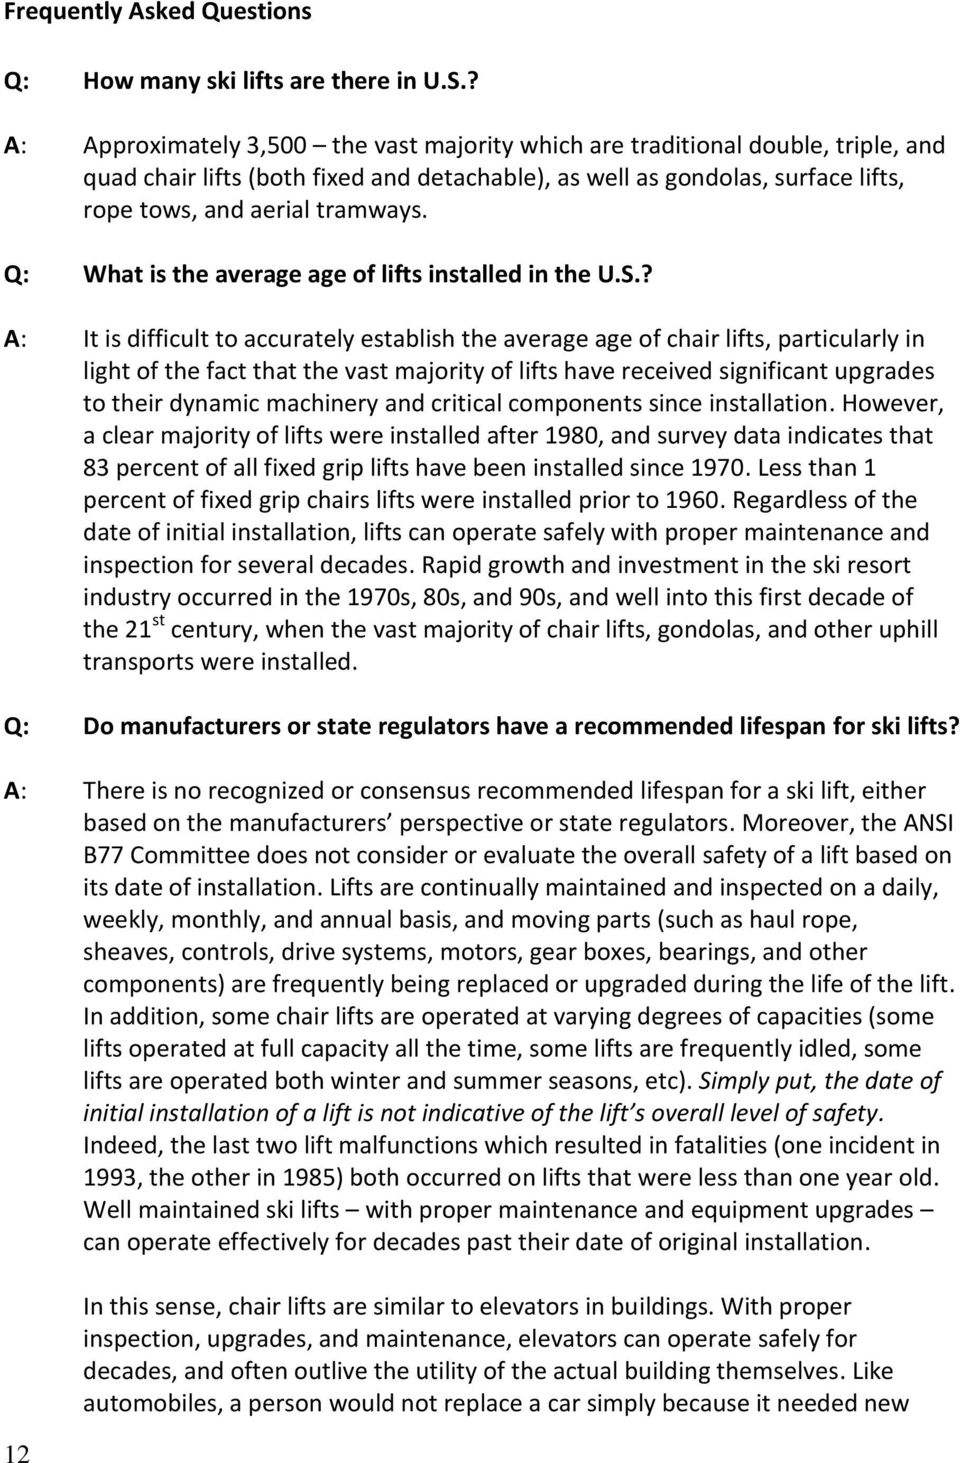 Q: What is the average age of lifts installed in the U.S.